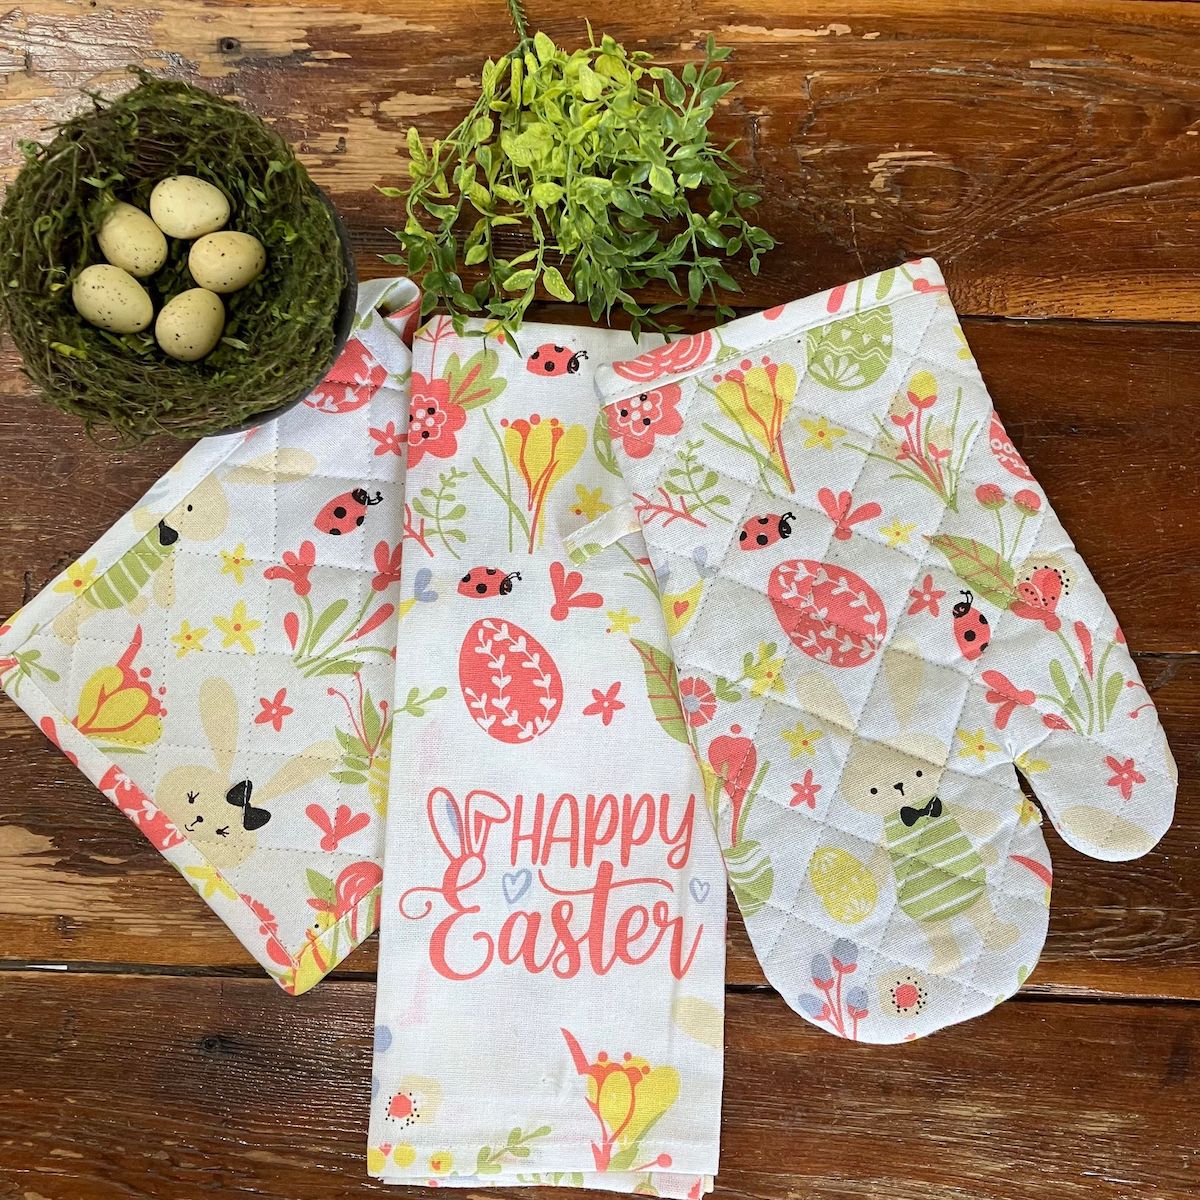 Happy Easter Kitchen Towel, Oven Mitt and Pot Holder